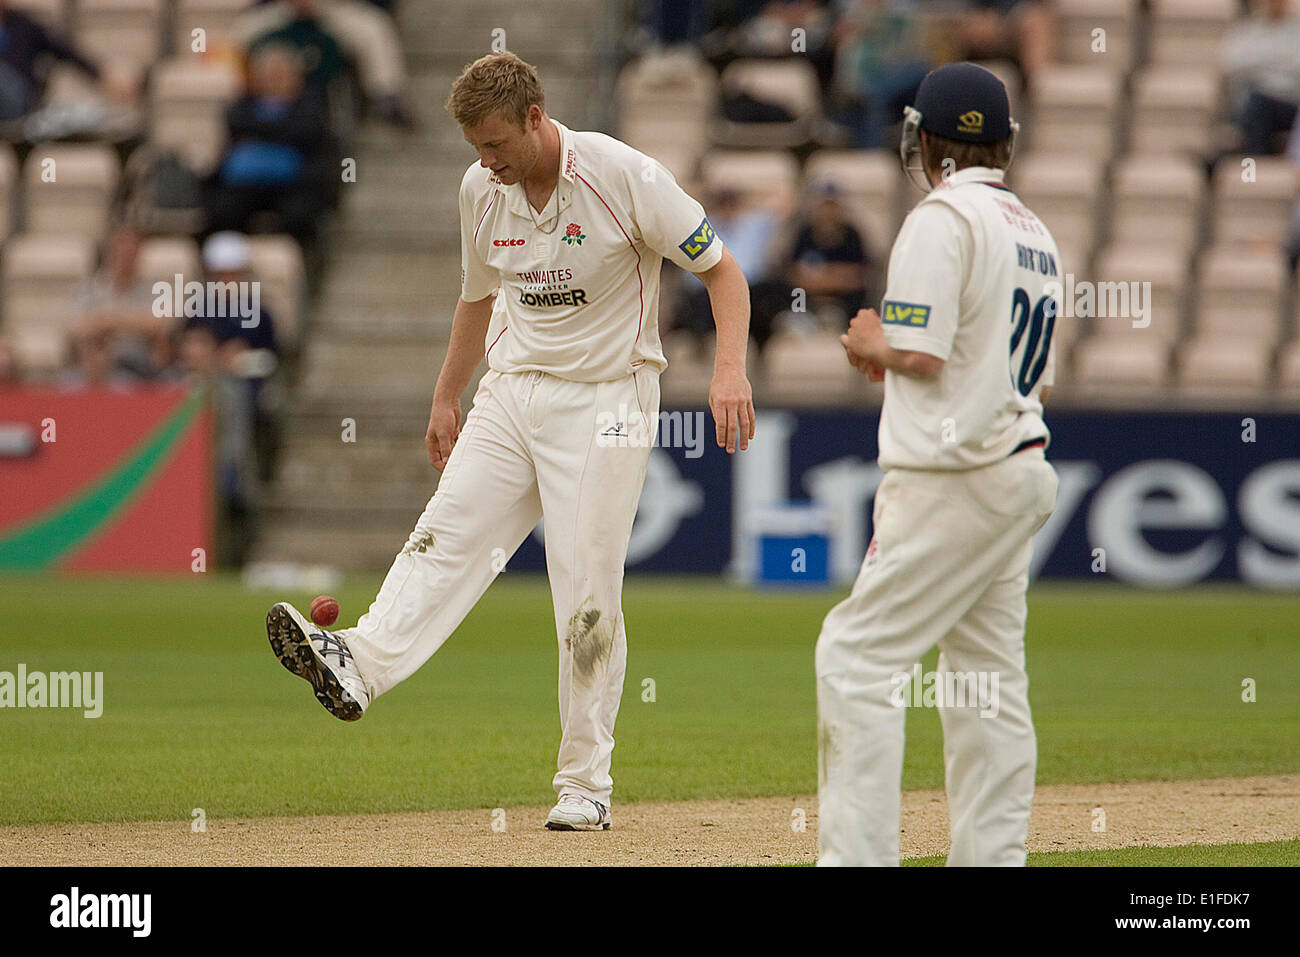 English Cricketer Andrew 'Freddie' Flintoff Picture by James Boardman Stock Photo